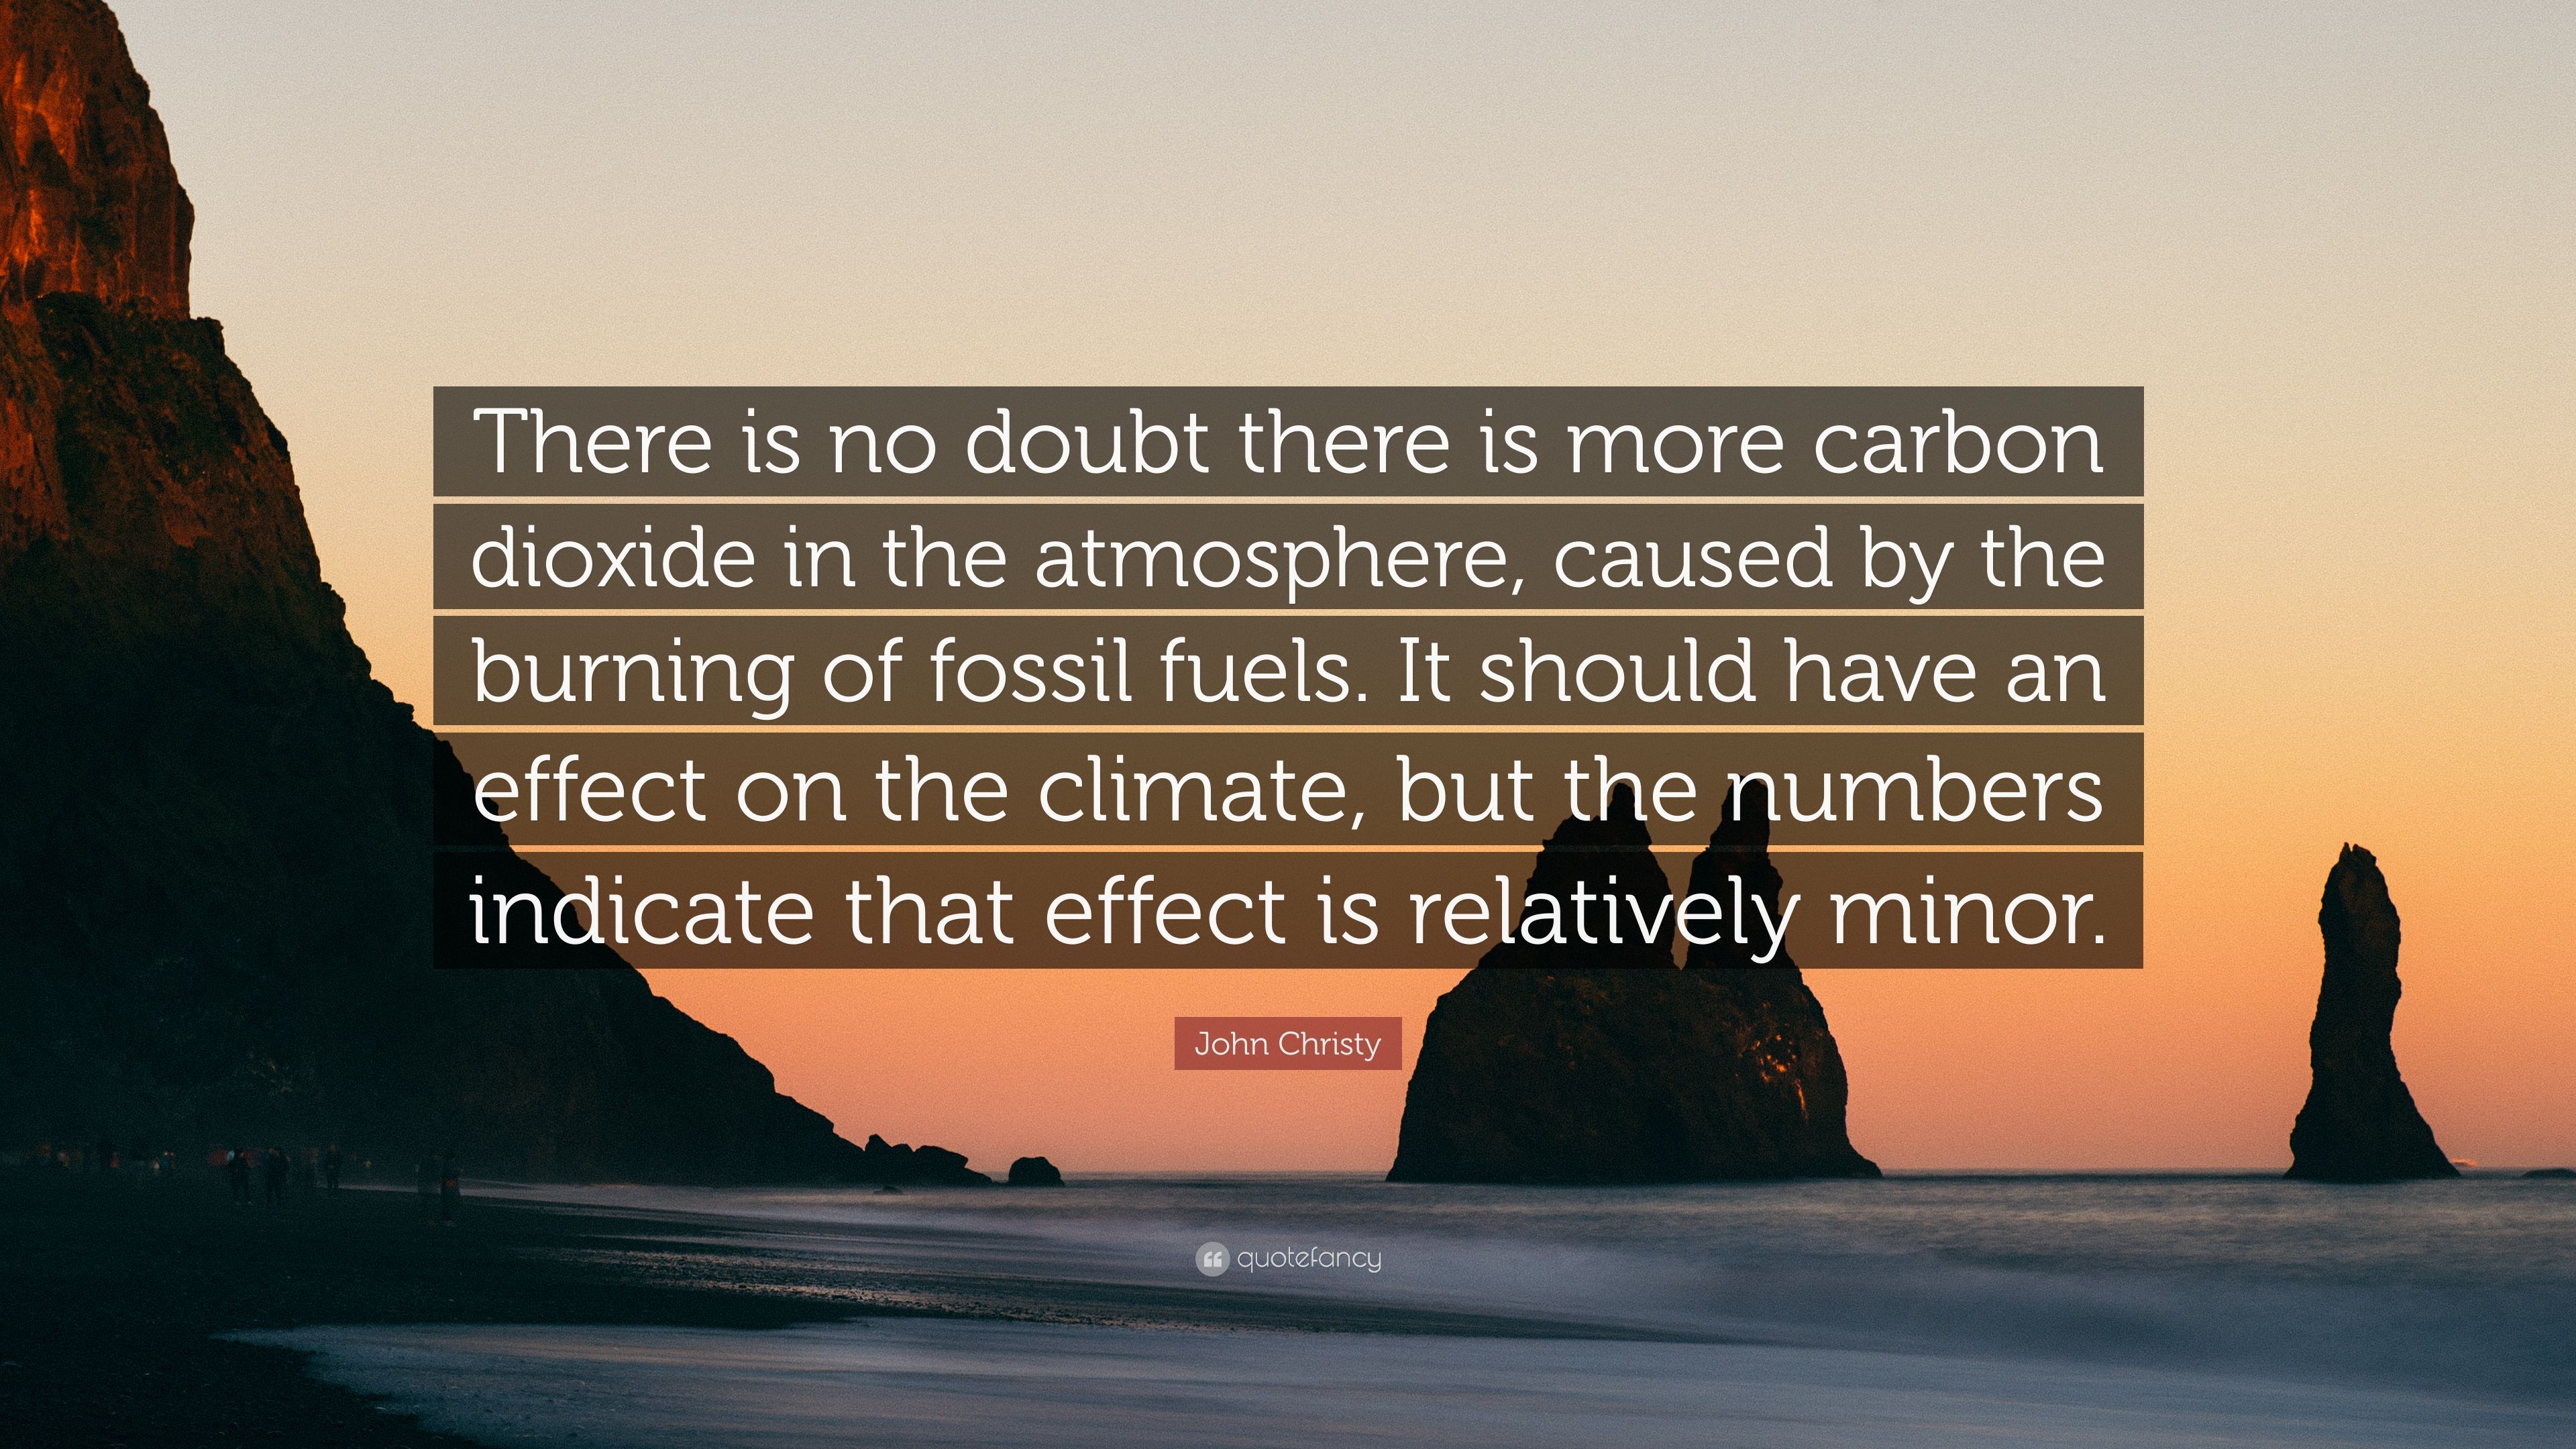 John Christy Quote: “There is no doubt there is more carbon dioxide